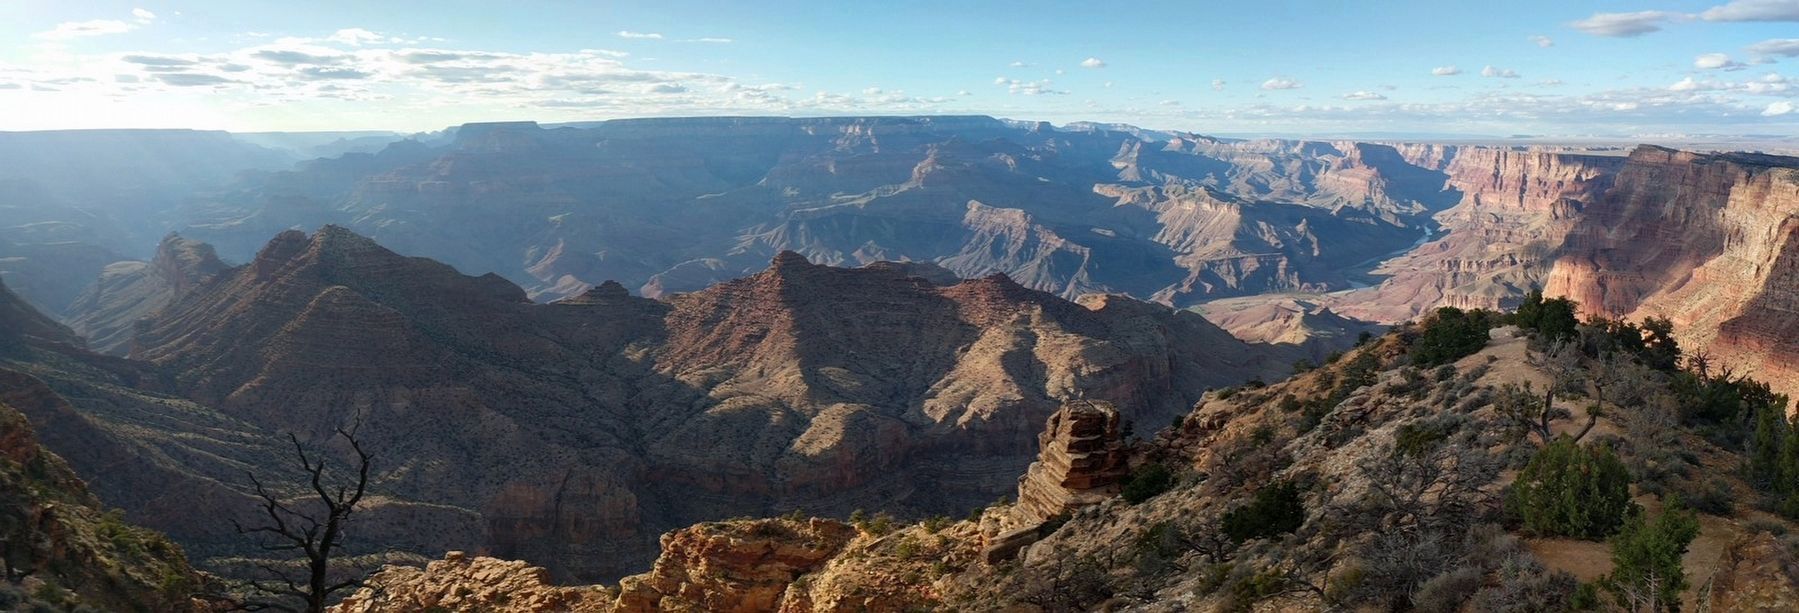 Desert View in Grand Canyon National Park image. Click for full size.